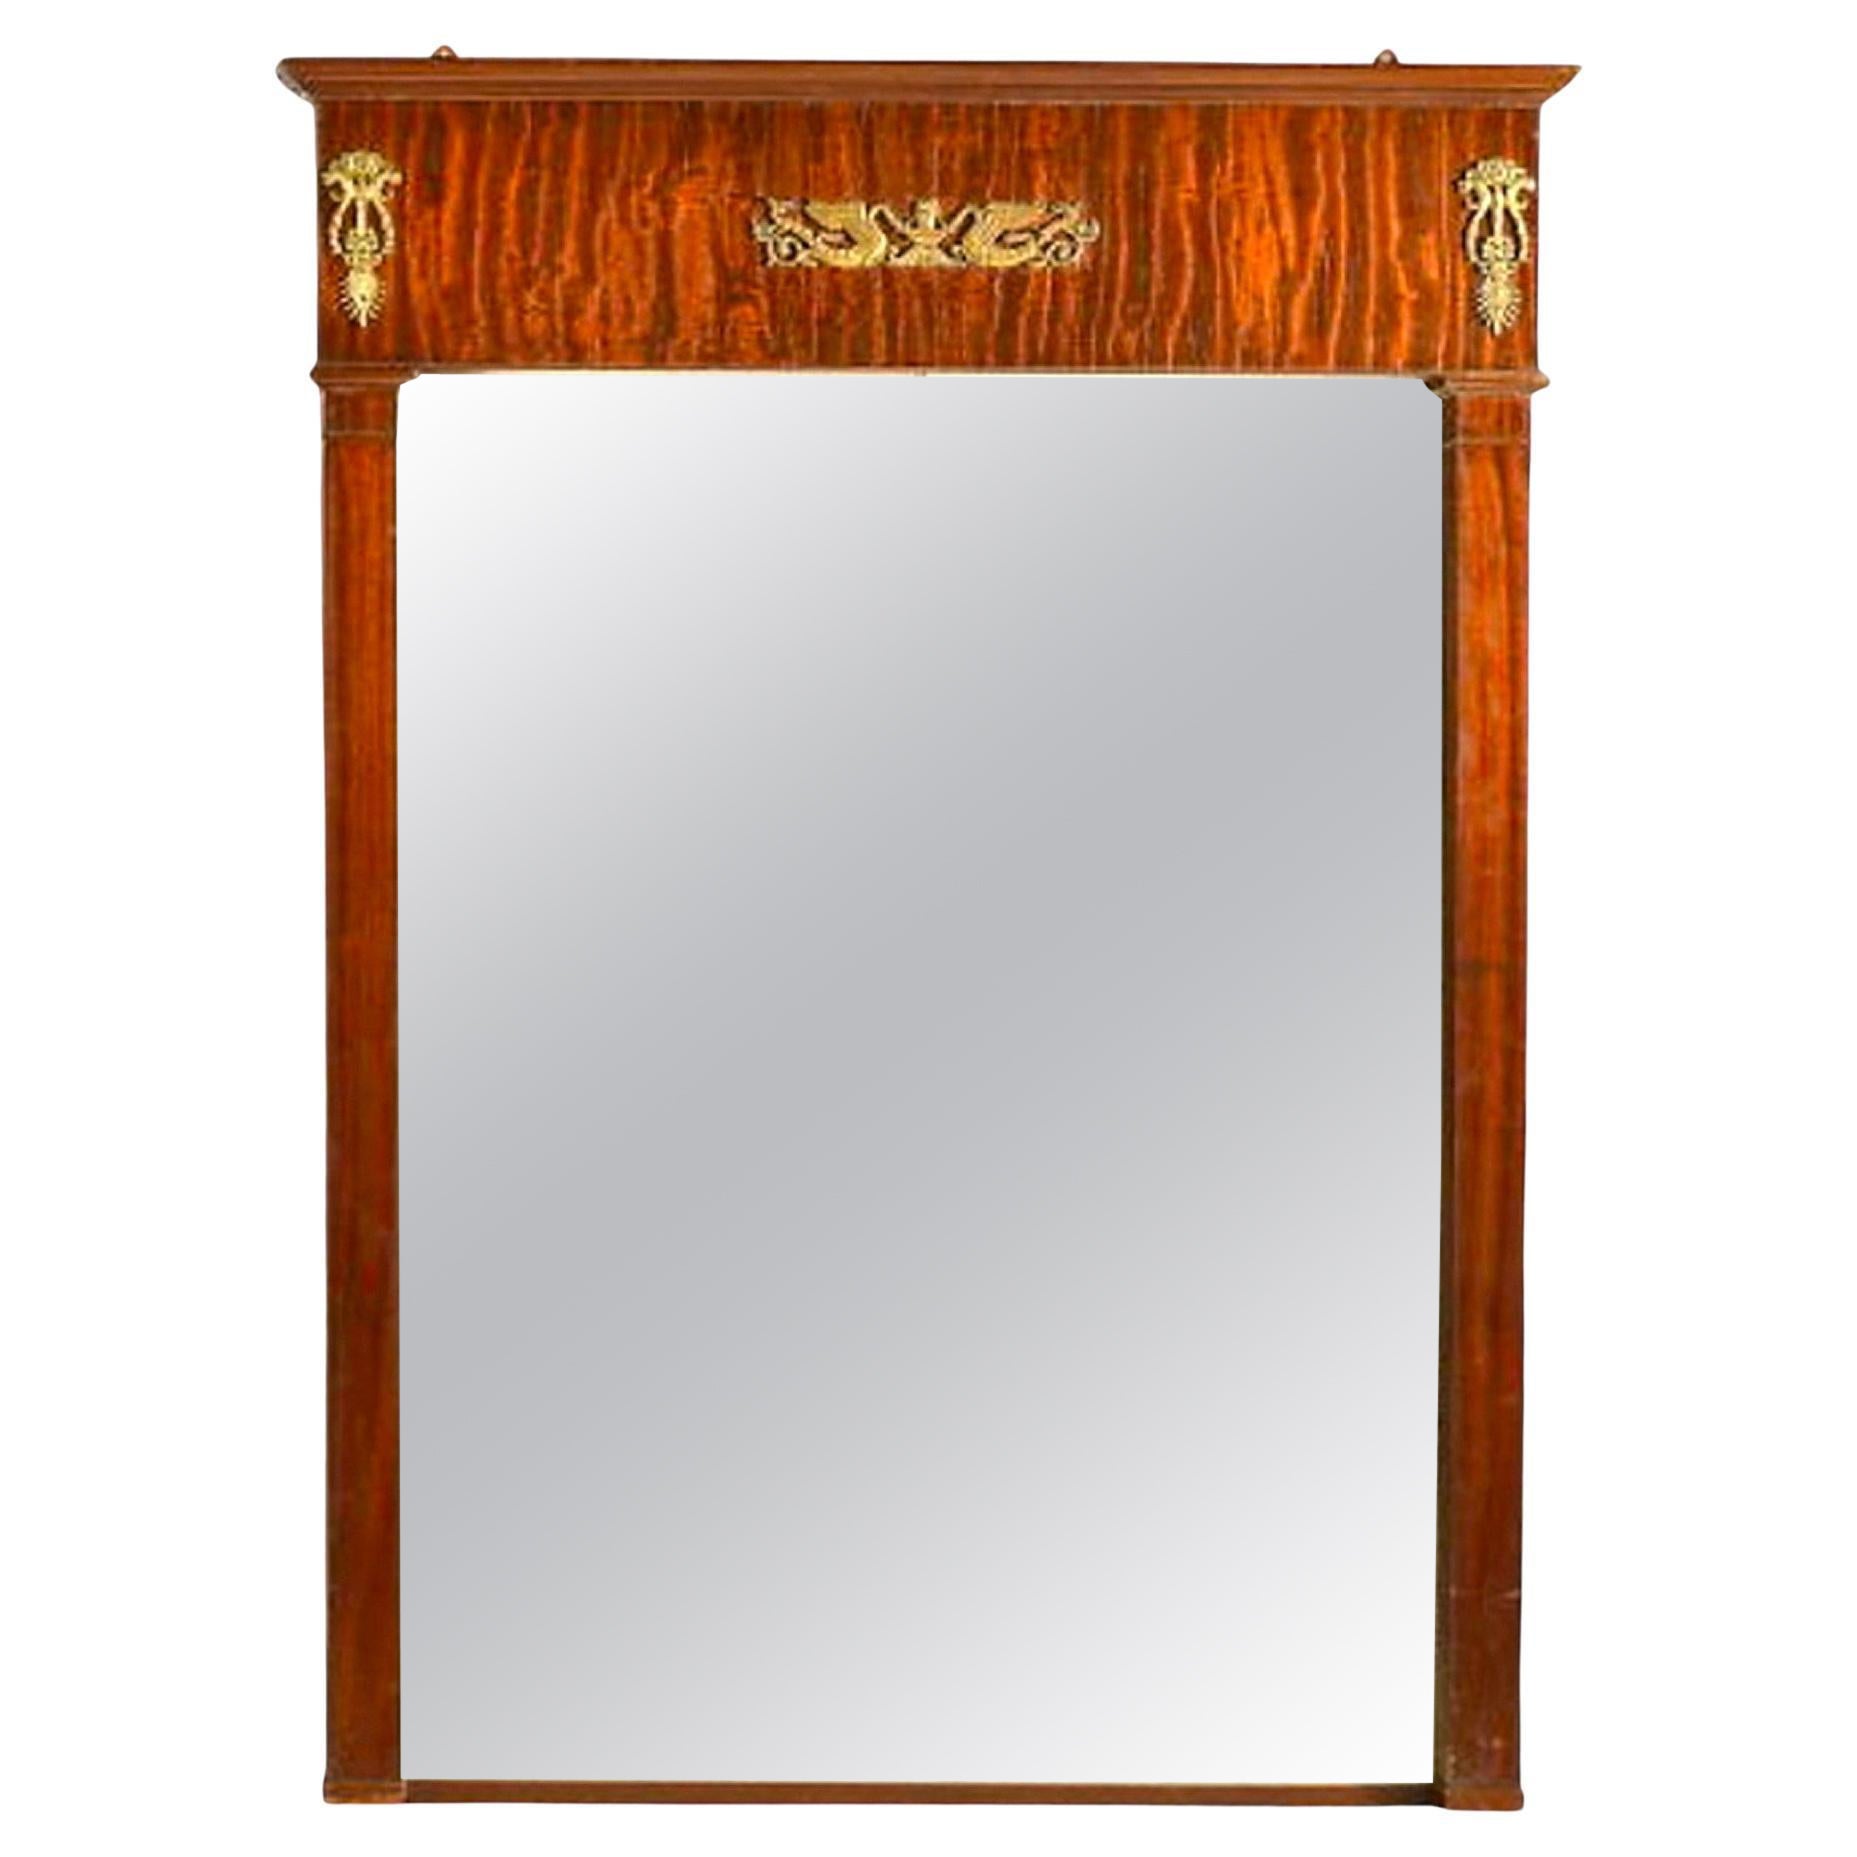 Mahogany and Gilt Metal Large Wall Mirror in Empire Taste